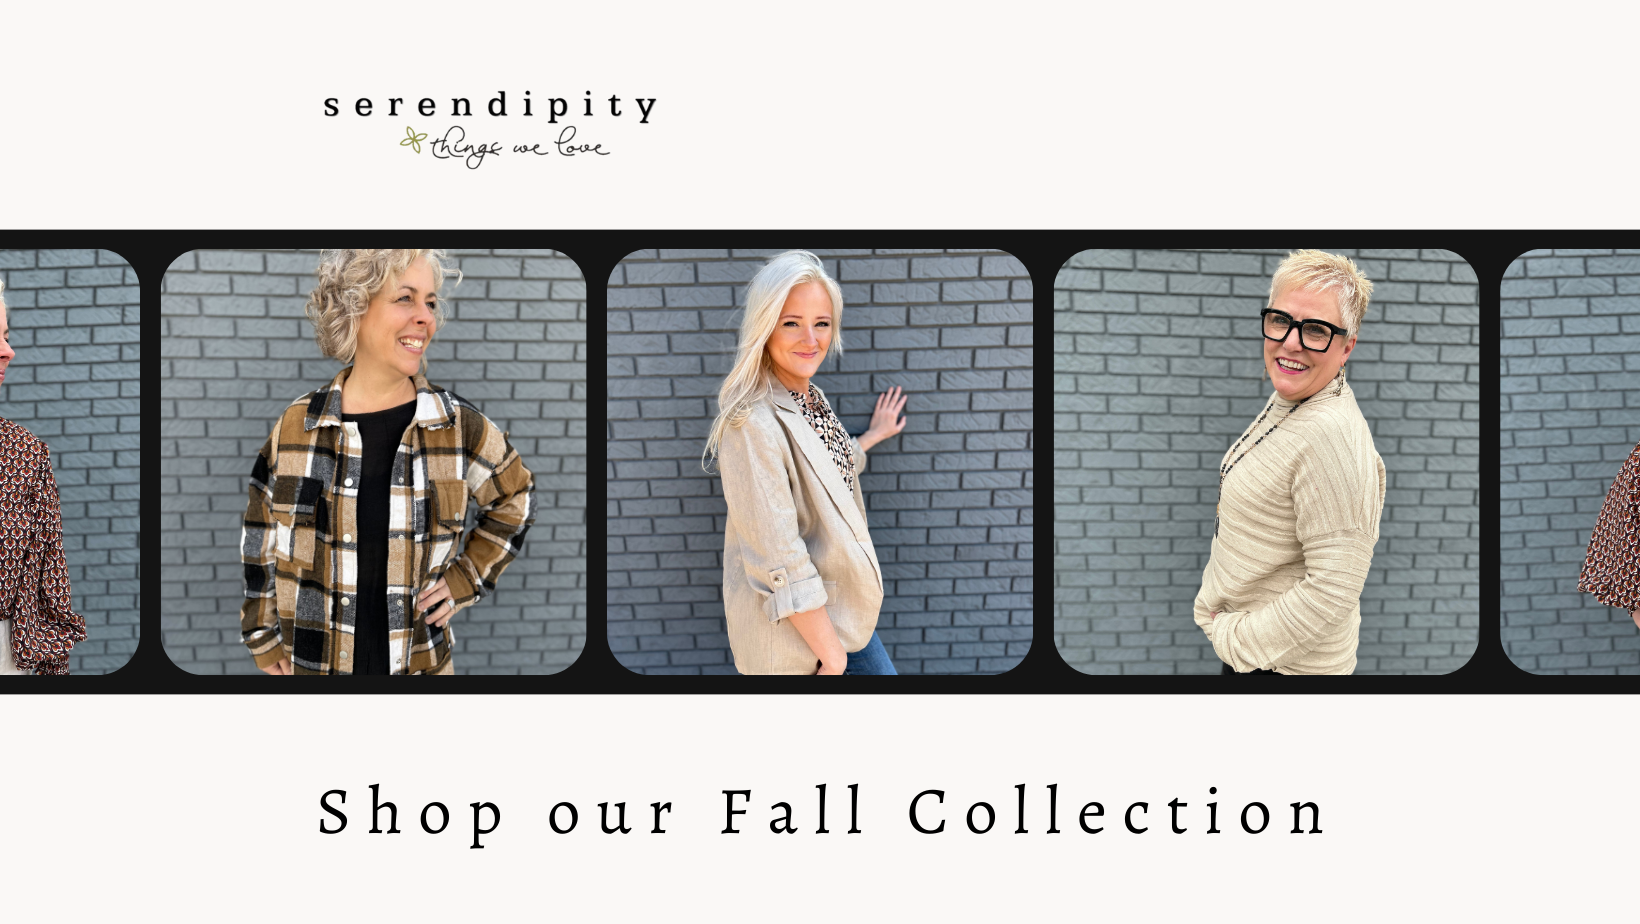 3 ladies. one in her 30s, one in her 40s and one in her 50s. posing with some of the new fall clothes available at Serendipity